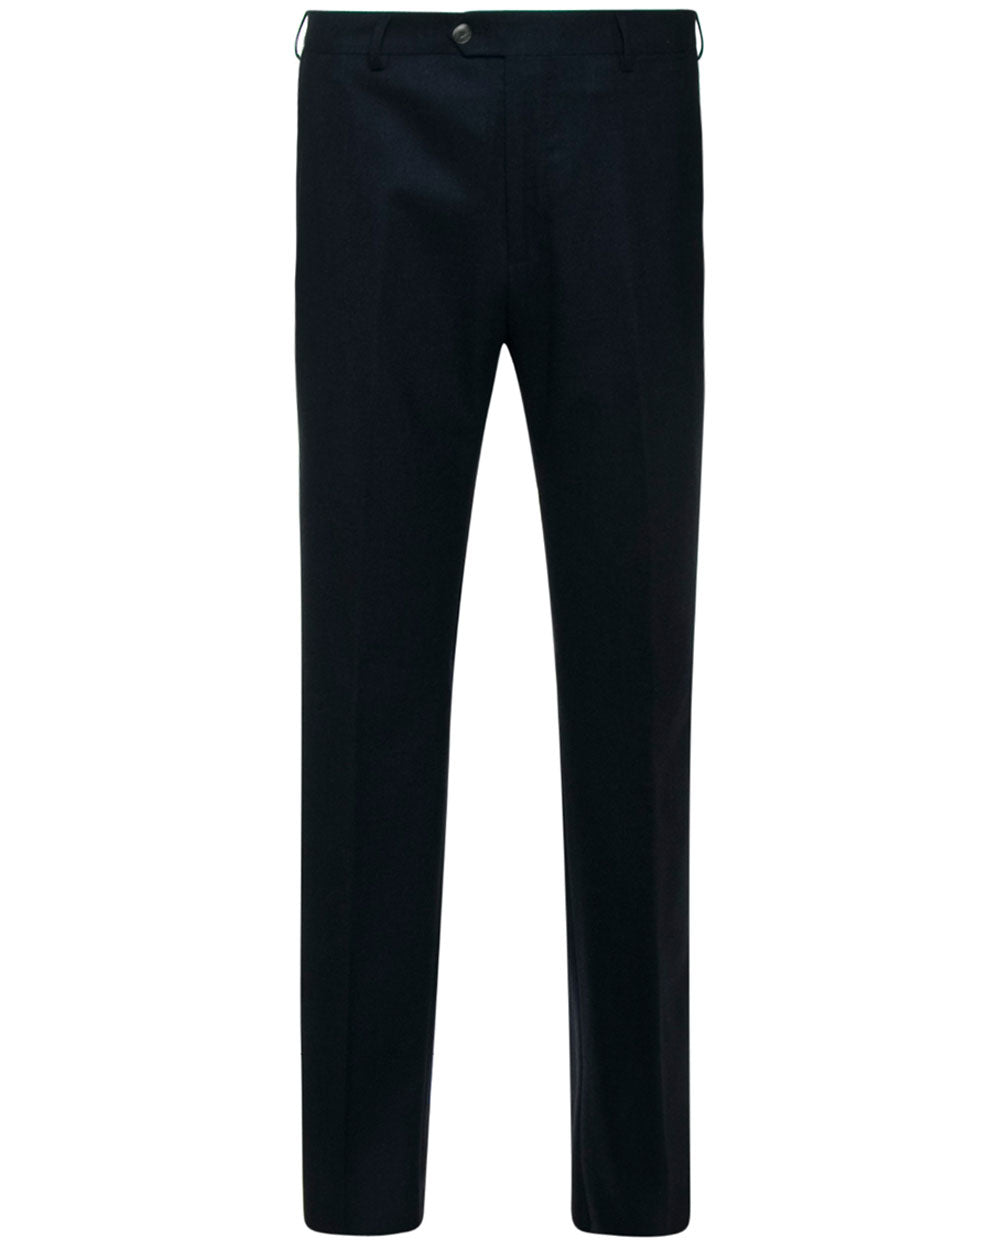 Cashmere Dress Pant in Black